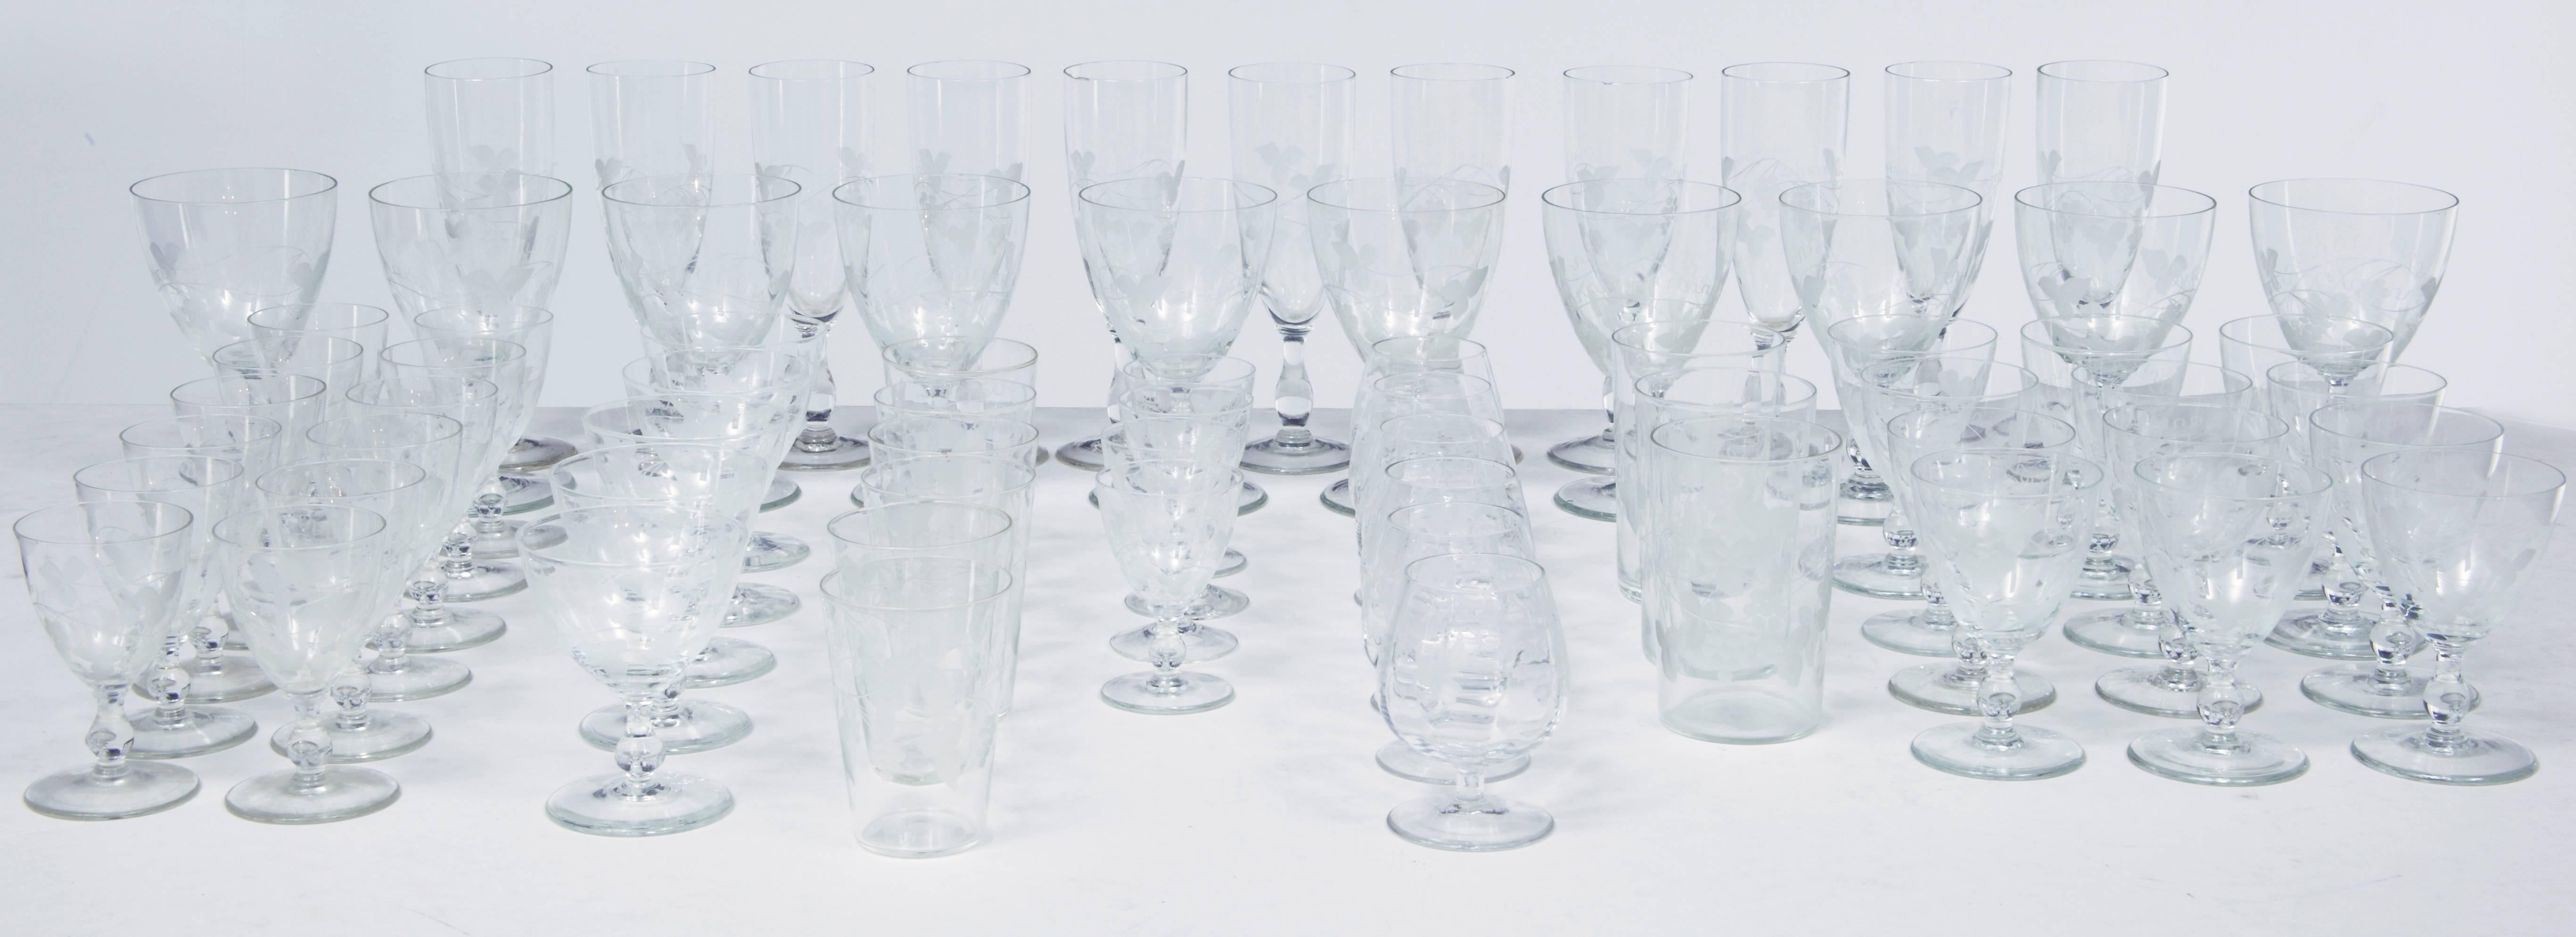 A fine collection of 1930s Riihimaki Savoy vine etched glasses
Fine set of 69 glasses from the well known Finnish makers Rihhimaki.

11 champayne flutes
10 large wine glasses
12 small wine glasses
12 port glasses
6 brandy glasses
6 small